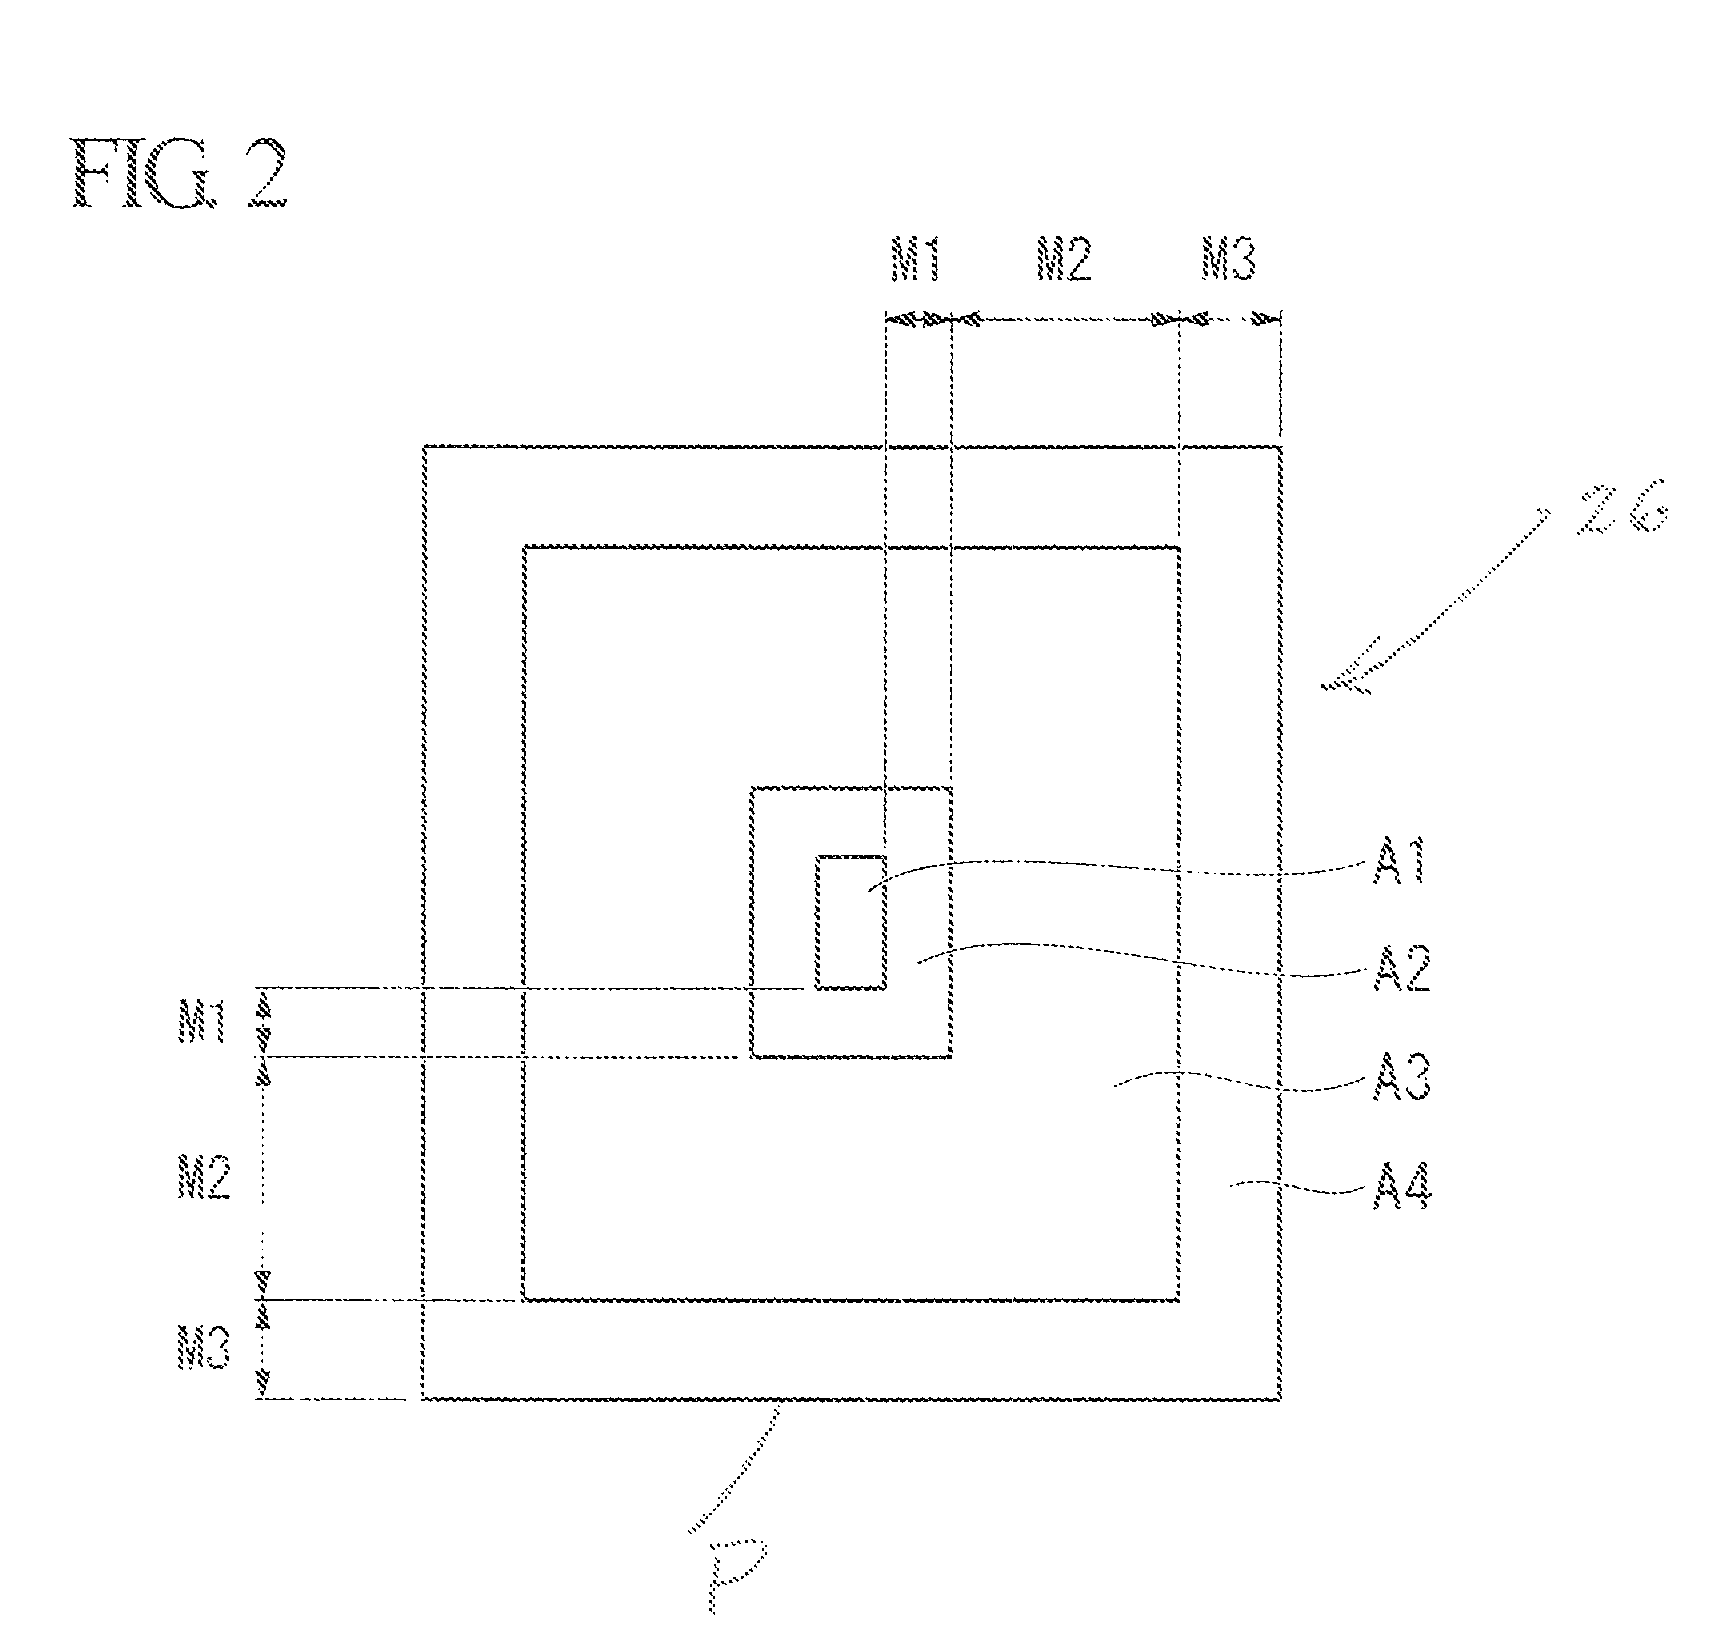 Semiconductor device having an increased area of one of the opposing electrode parts for preventing generation of unconnected positions the electrodes on the bonded wafers